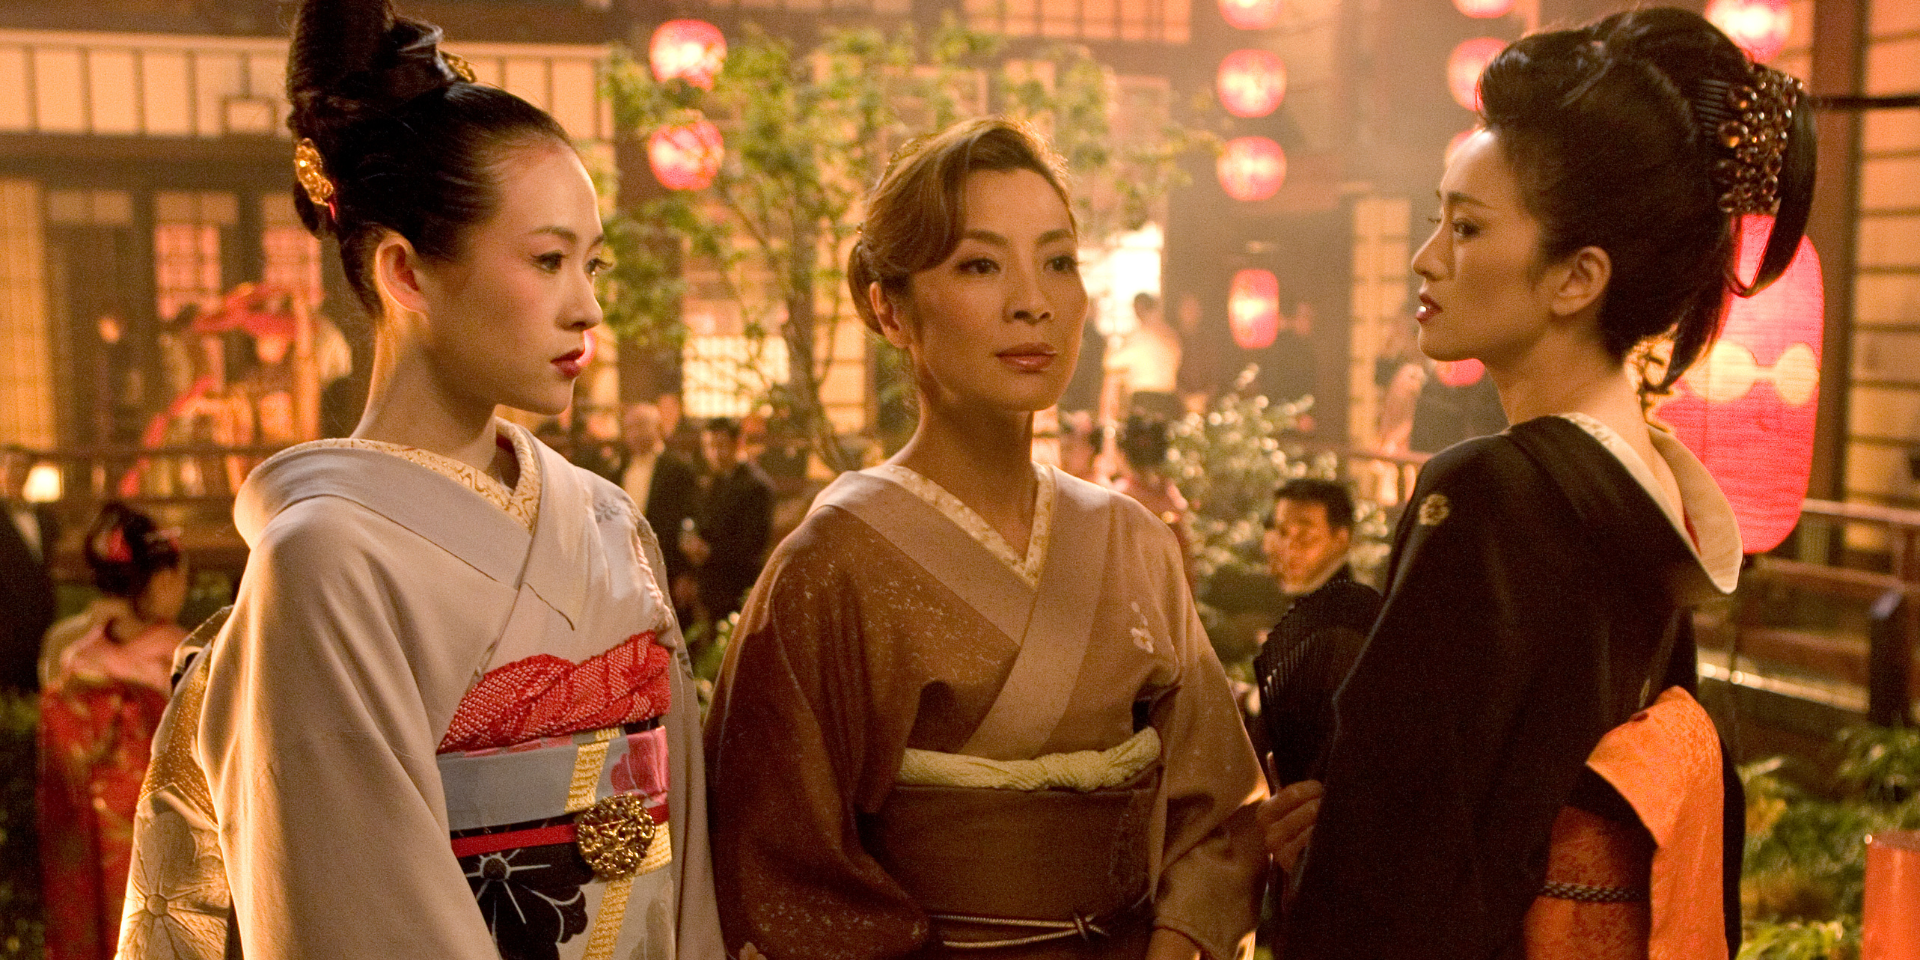 From Page To Screen - Memoirs of a Geisha